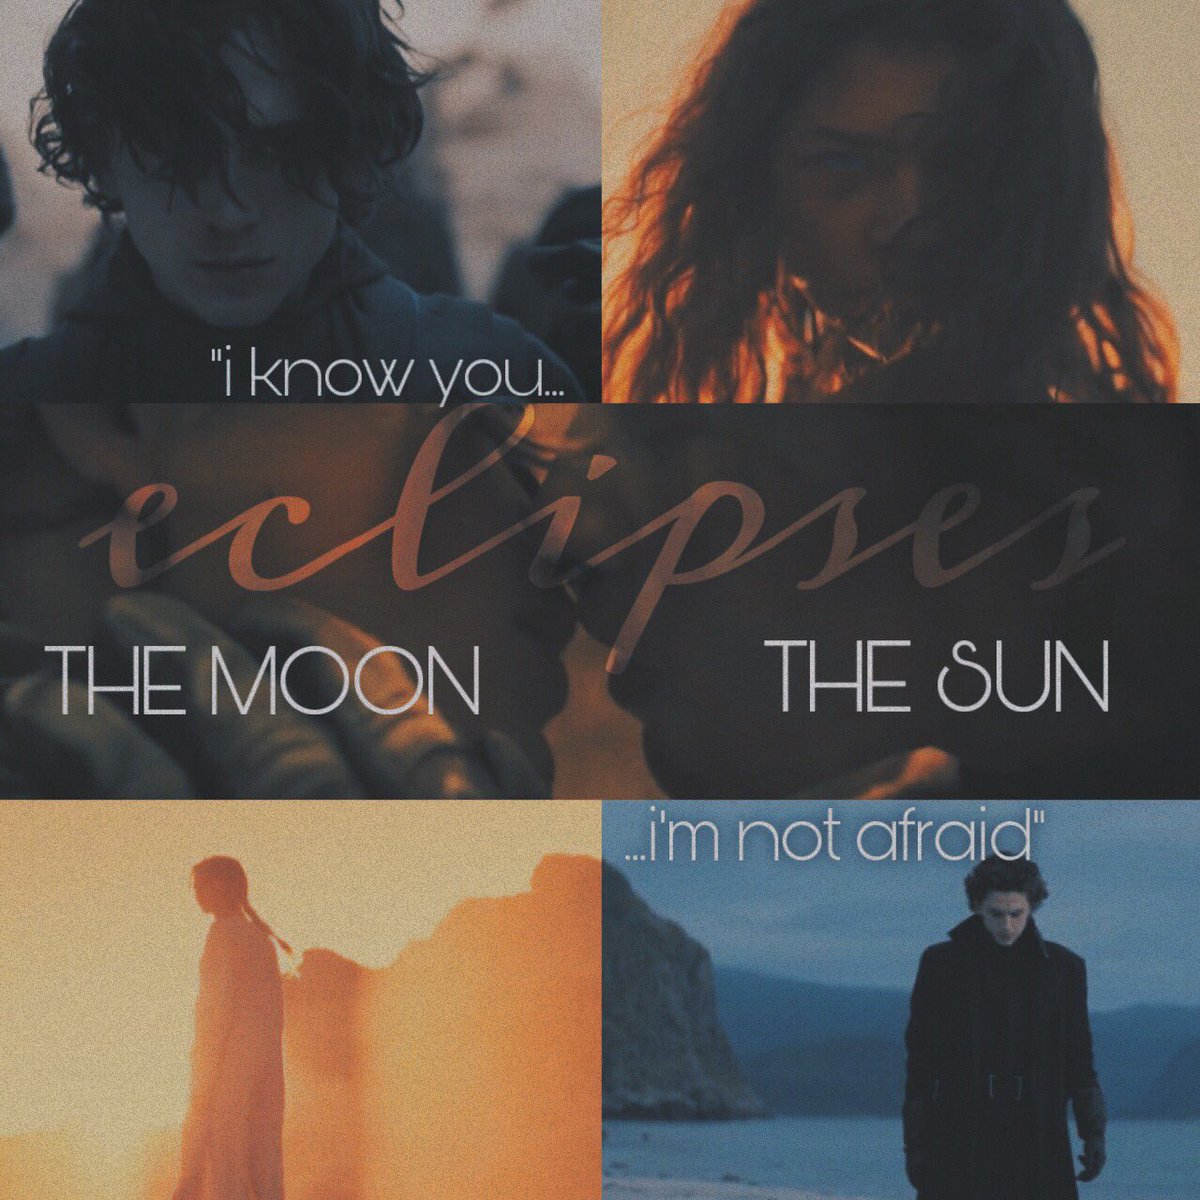 But more specifically I believe we will see the parallels of Paul being the Moon and Chani the Sun, be played up through visual cues. We already see the significant association between Chani and the sun. And some already of Paul and the moon.